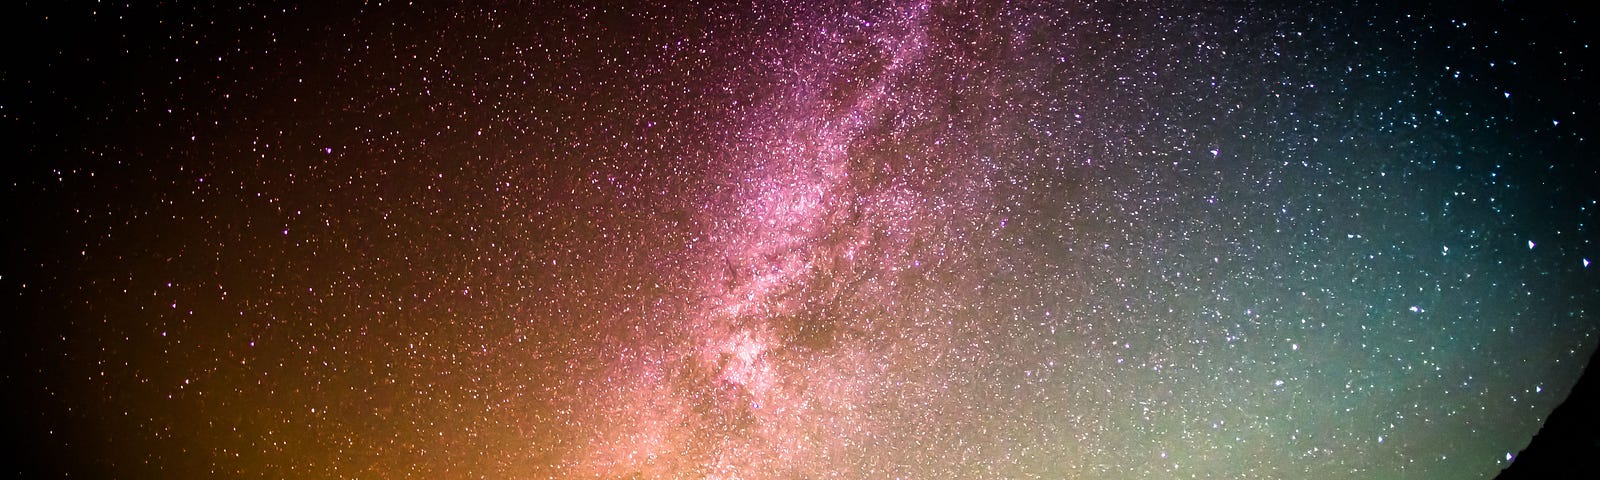 A person stands on the edge of the world, as a golden, pink and silvery universe spreads its infinite stars before him.